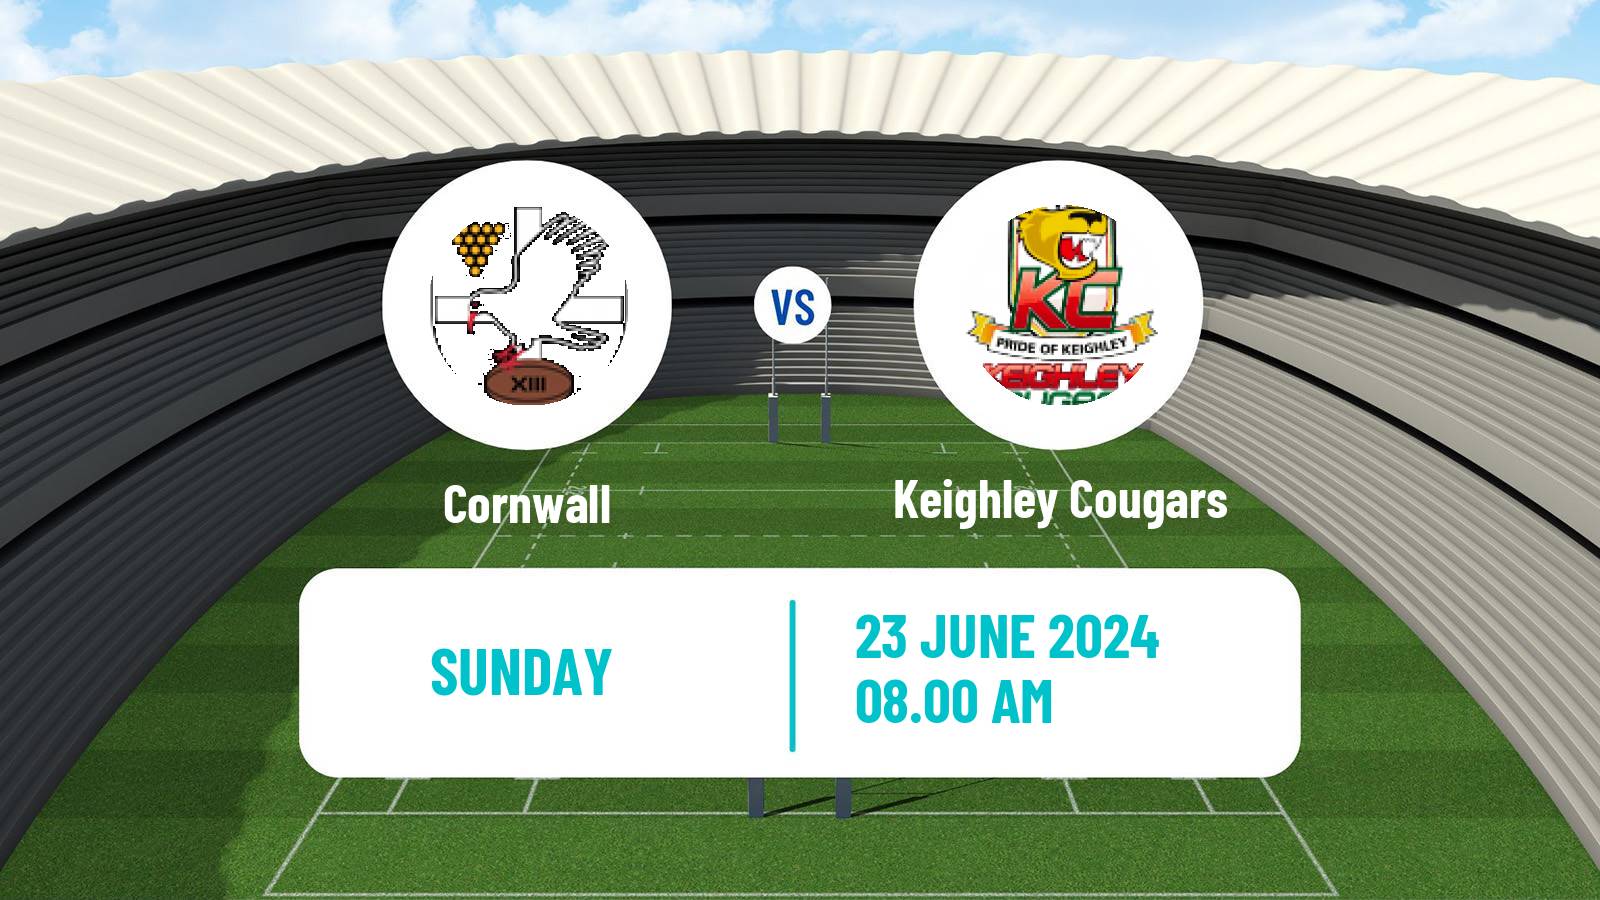 Rugby league English League 1 Rugby League Cornwall - Keighley Cougars